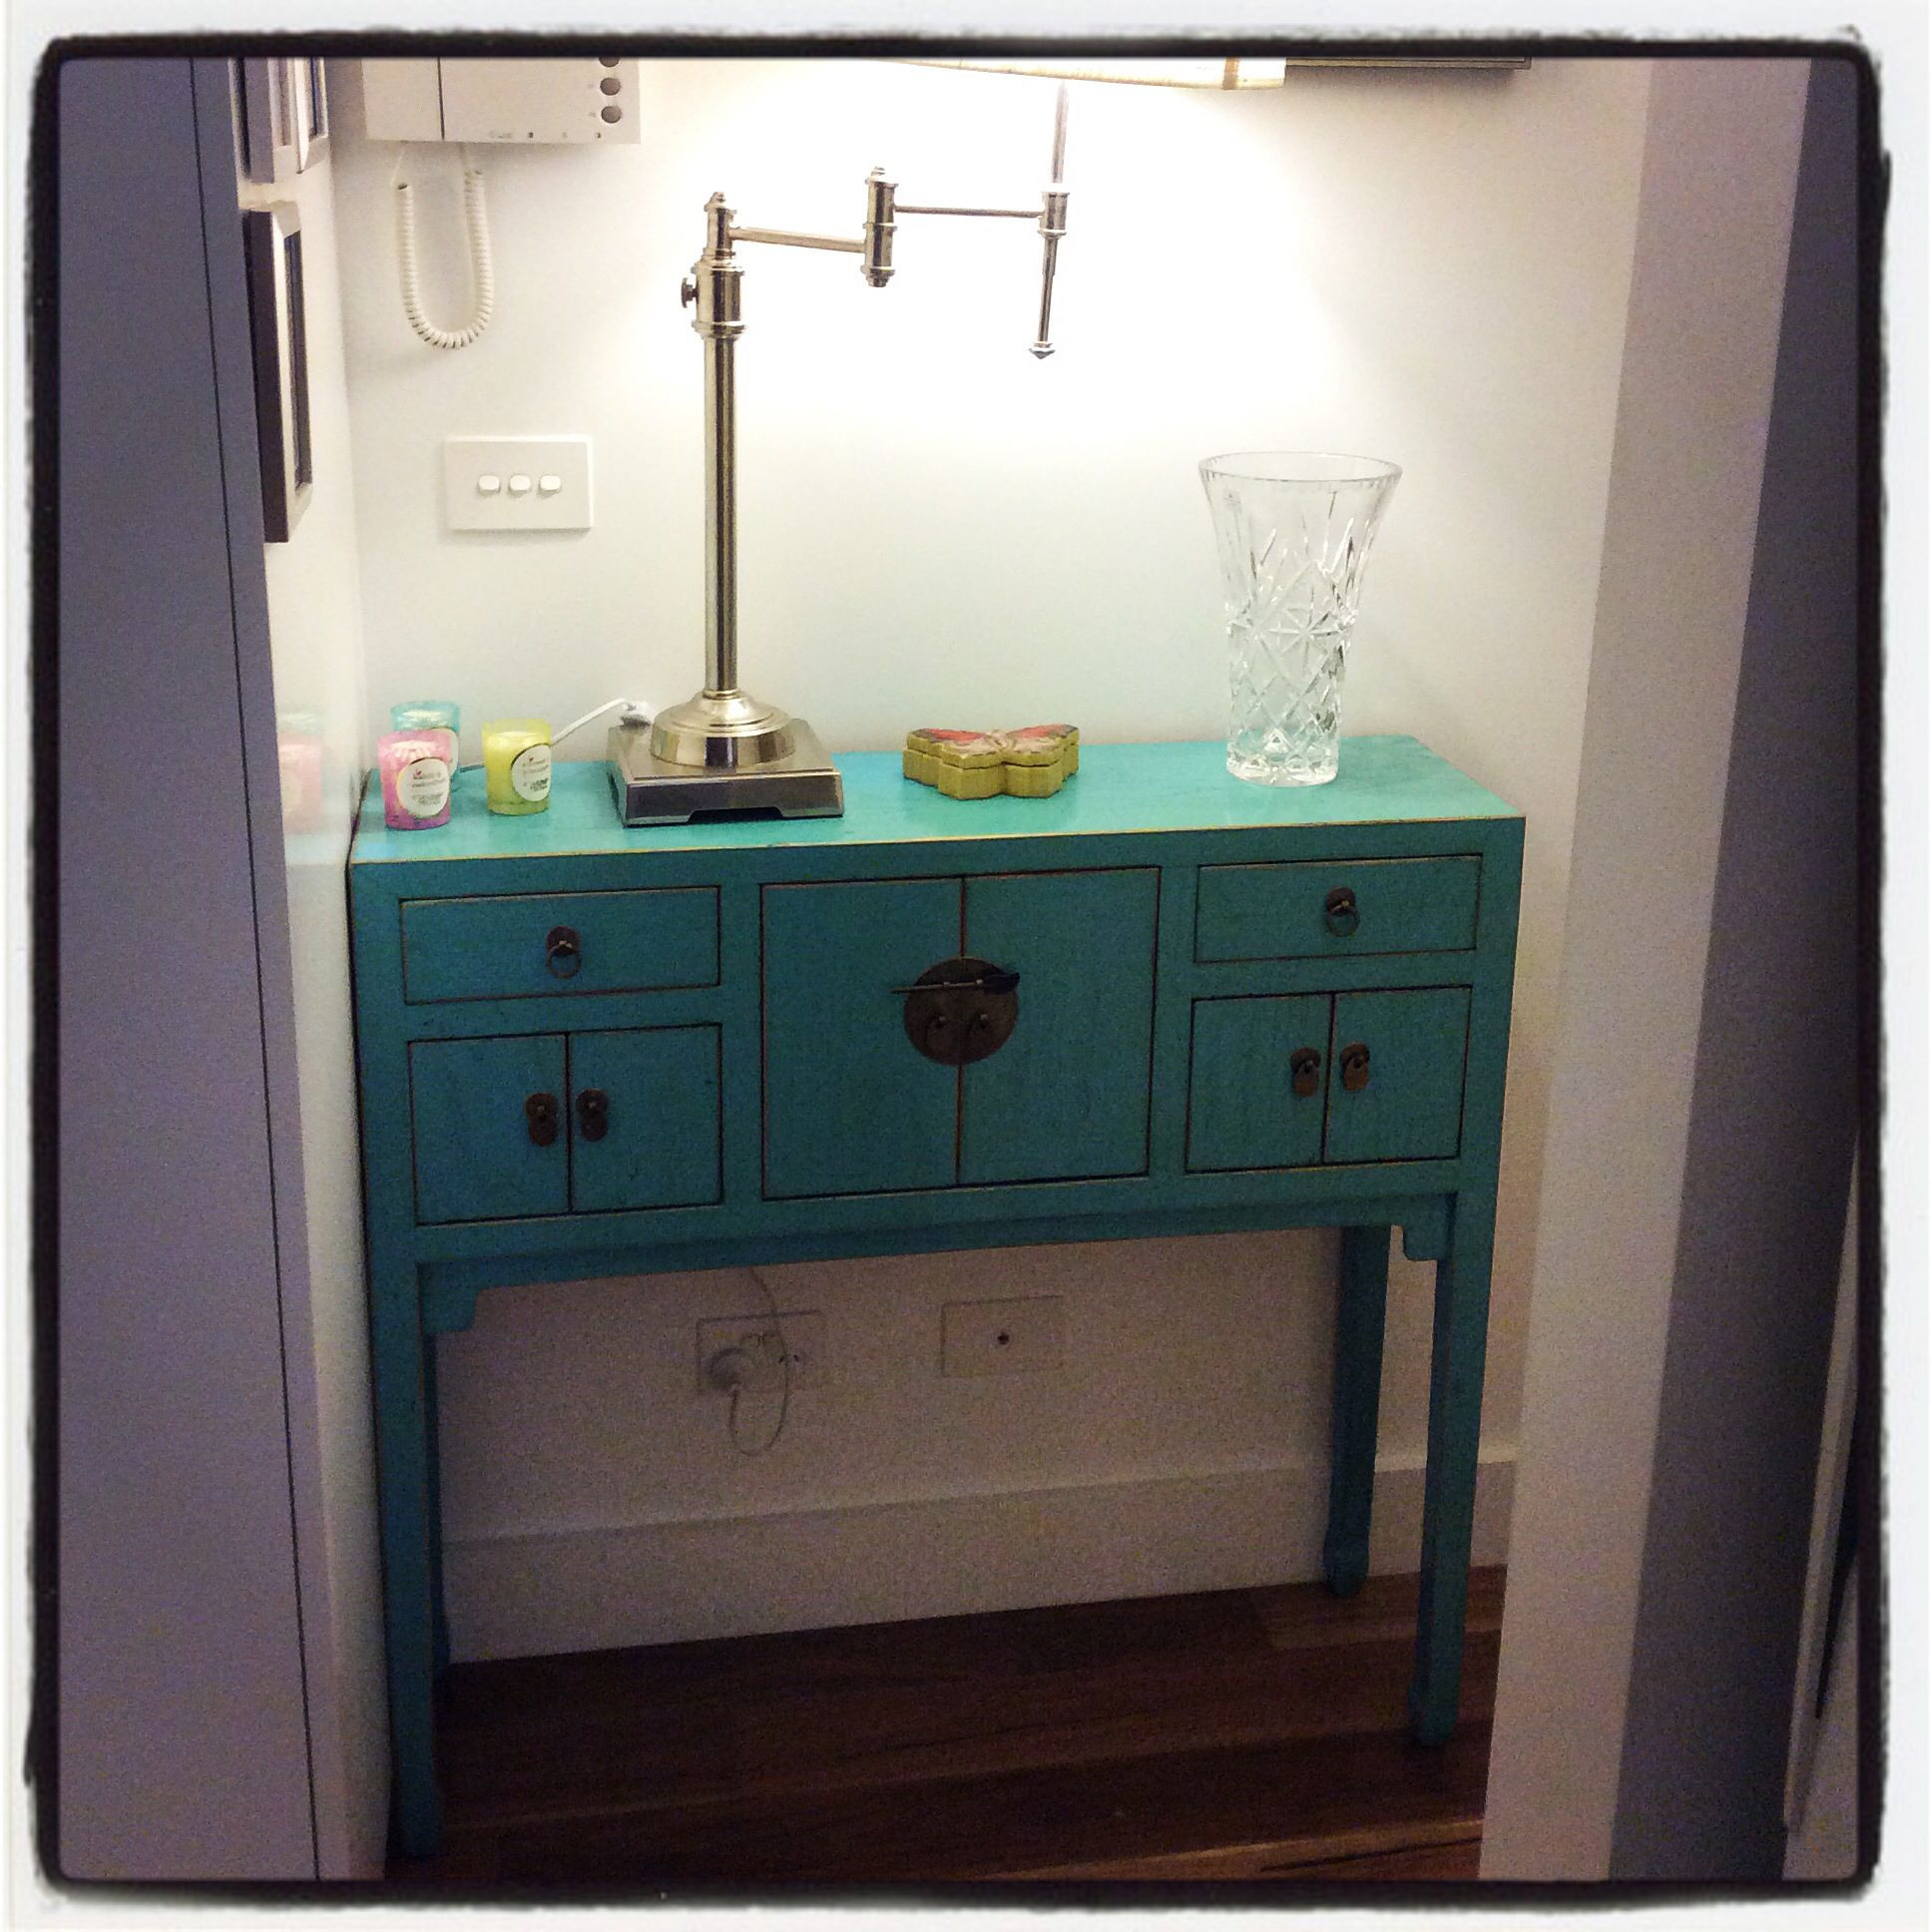 Turquoise Bathroom Vanity
 Turquoise entry table